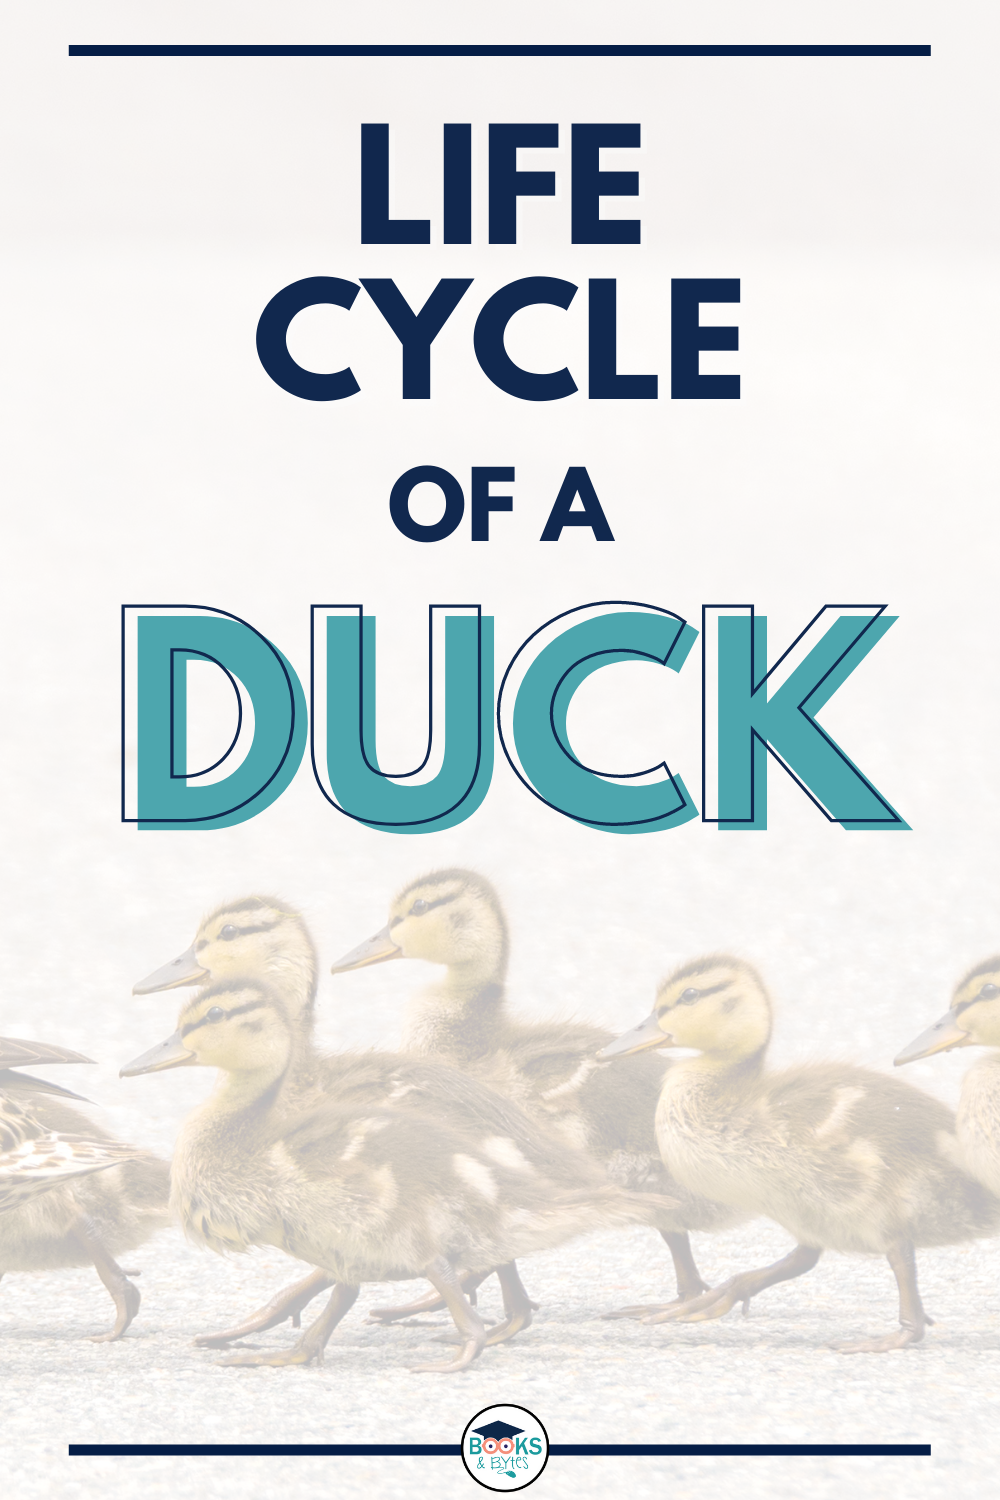 Duck Life - AVAILABLE NOW! The ducks have made their